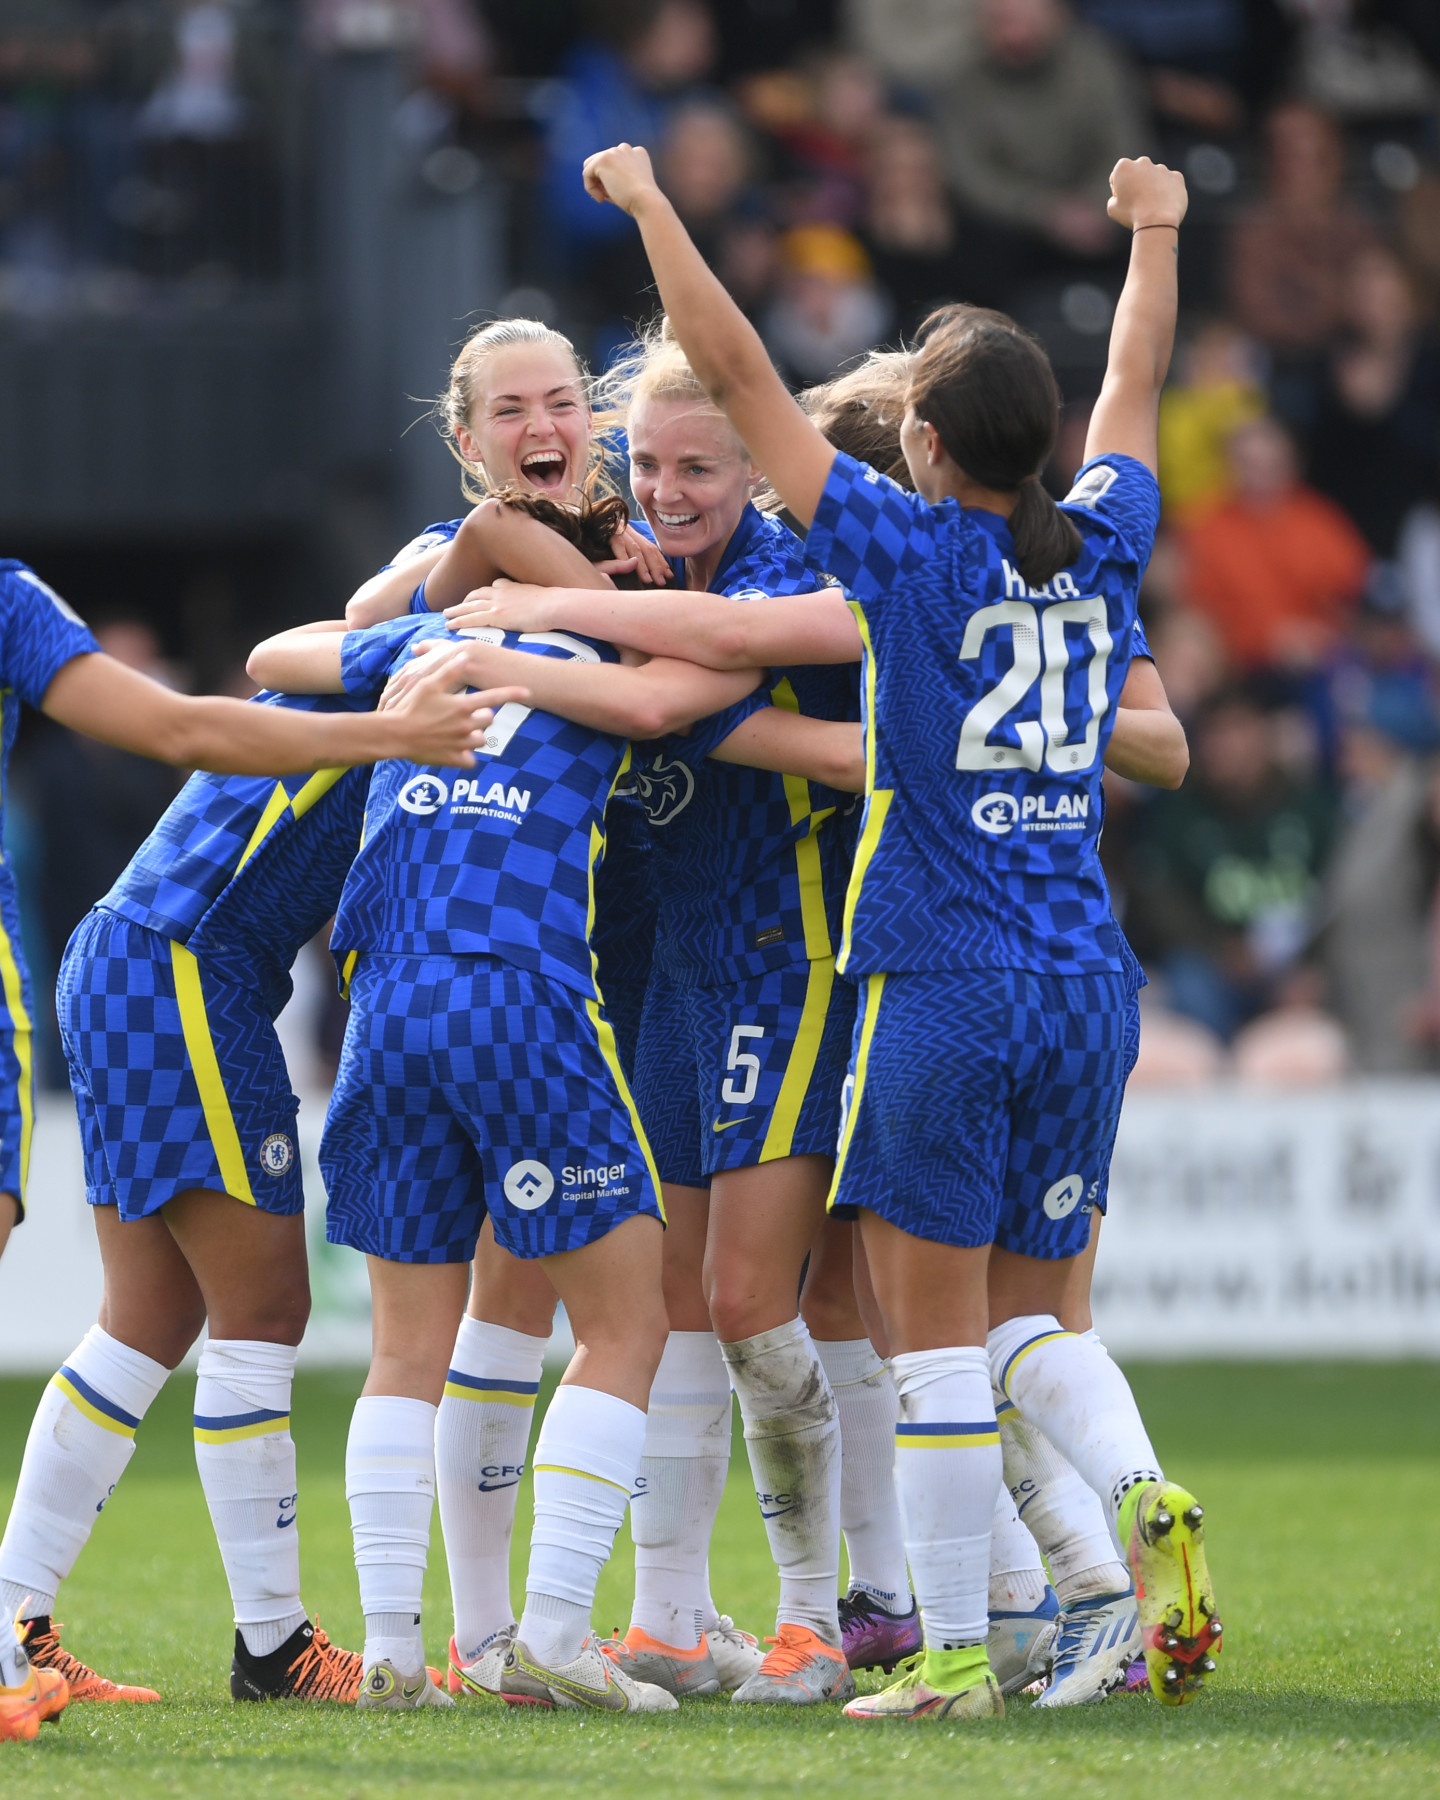 Chelsea Women vs Tottenham Hotspur Women Kick-off time, how to watch live and more! News Official Site Chelsea Football Club